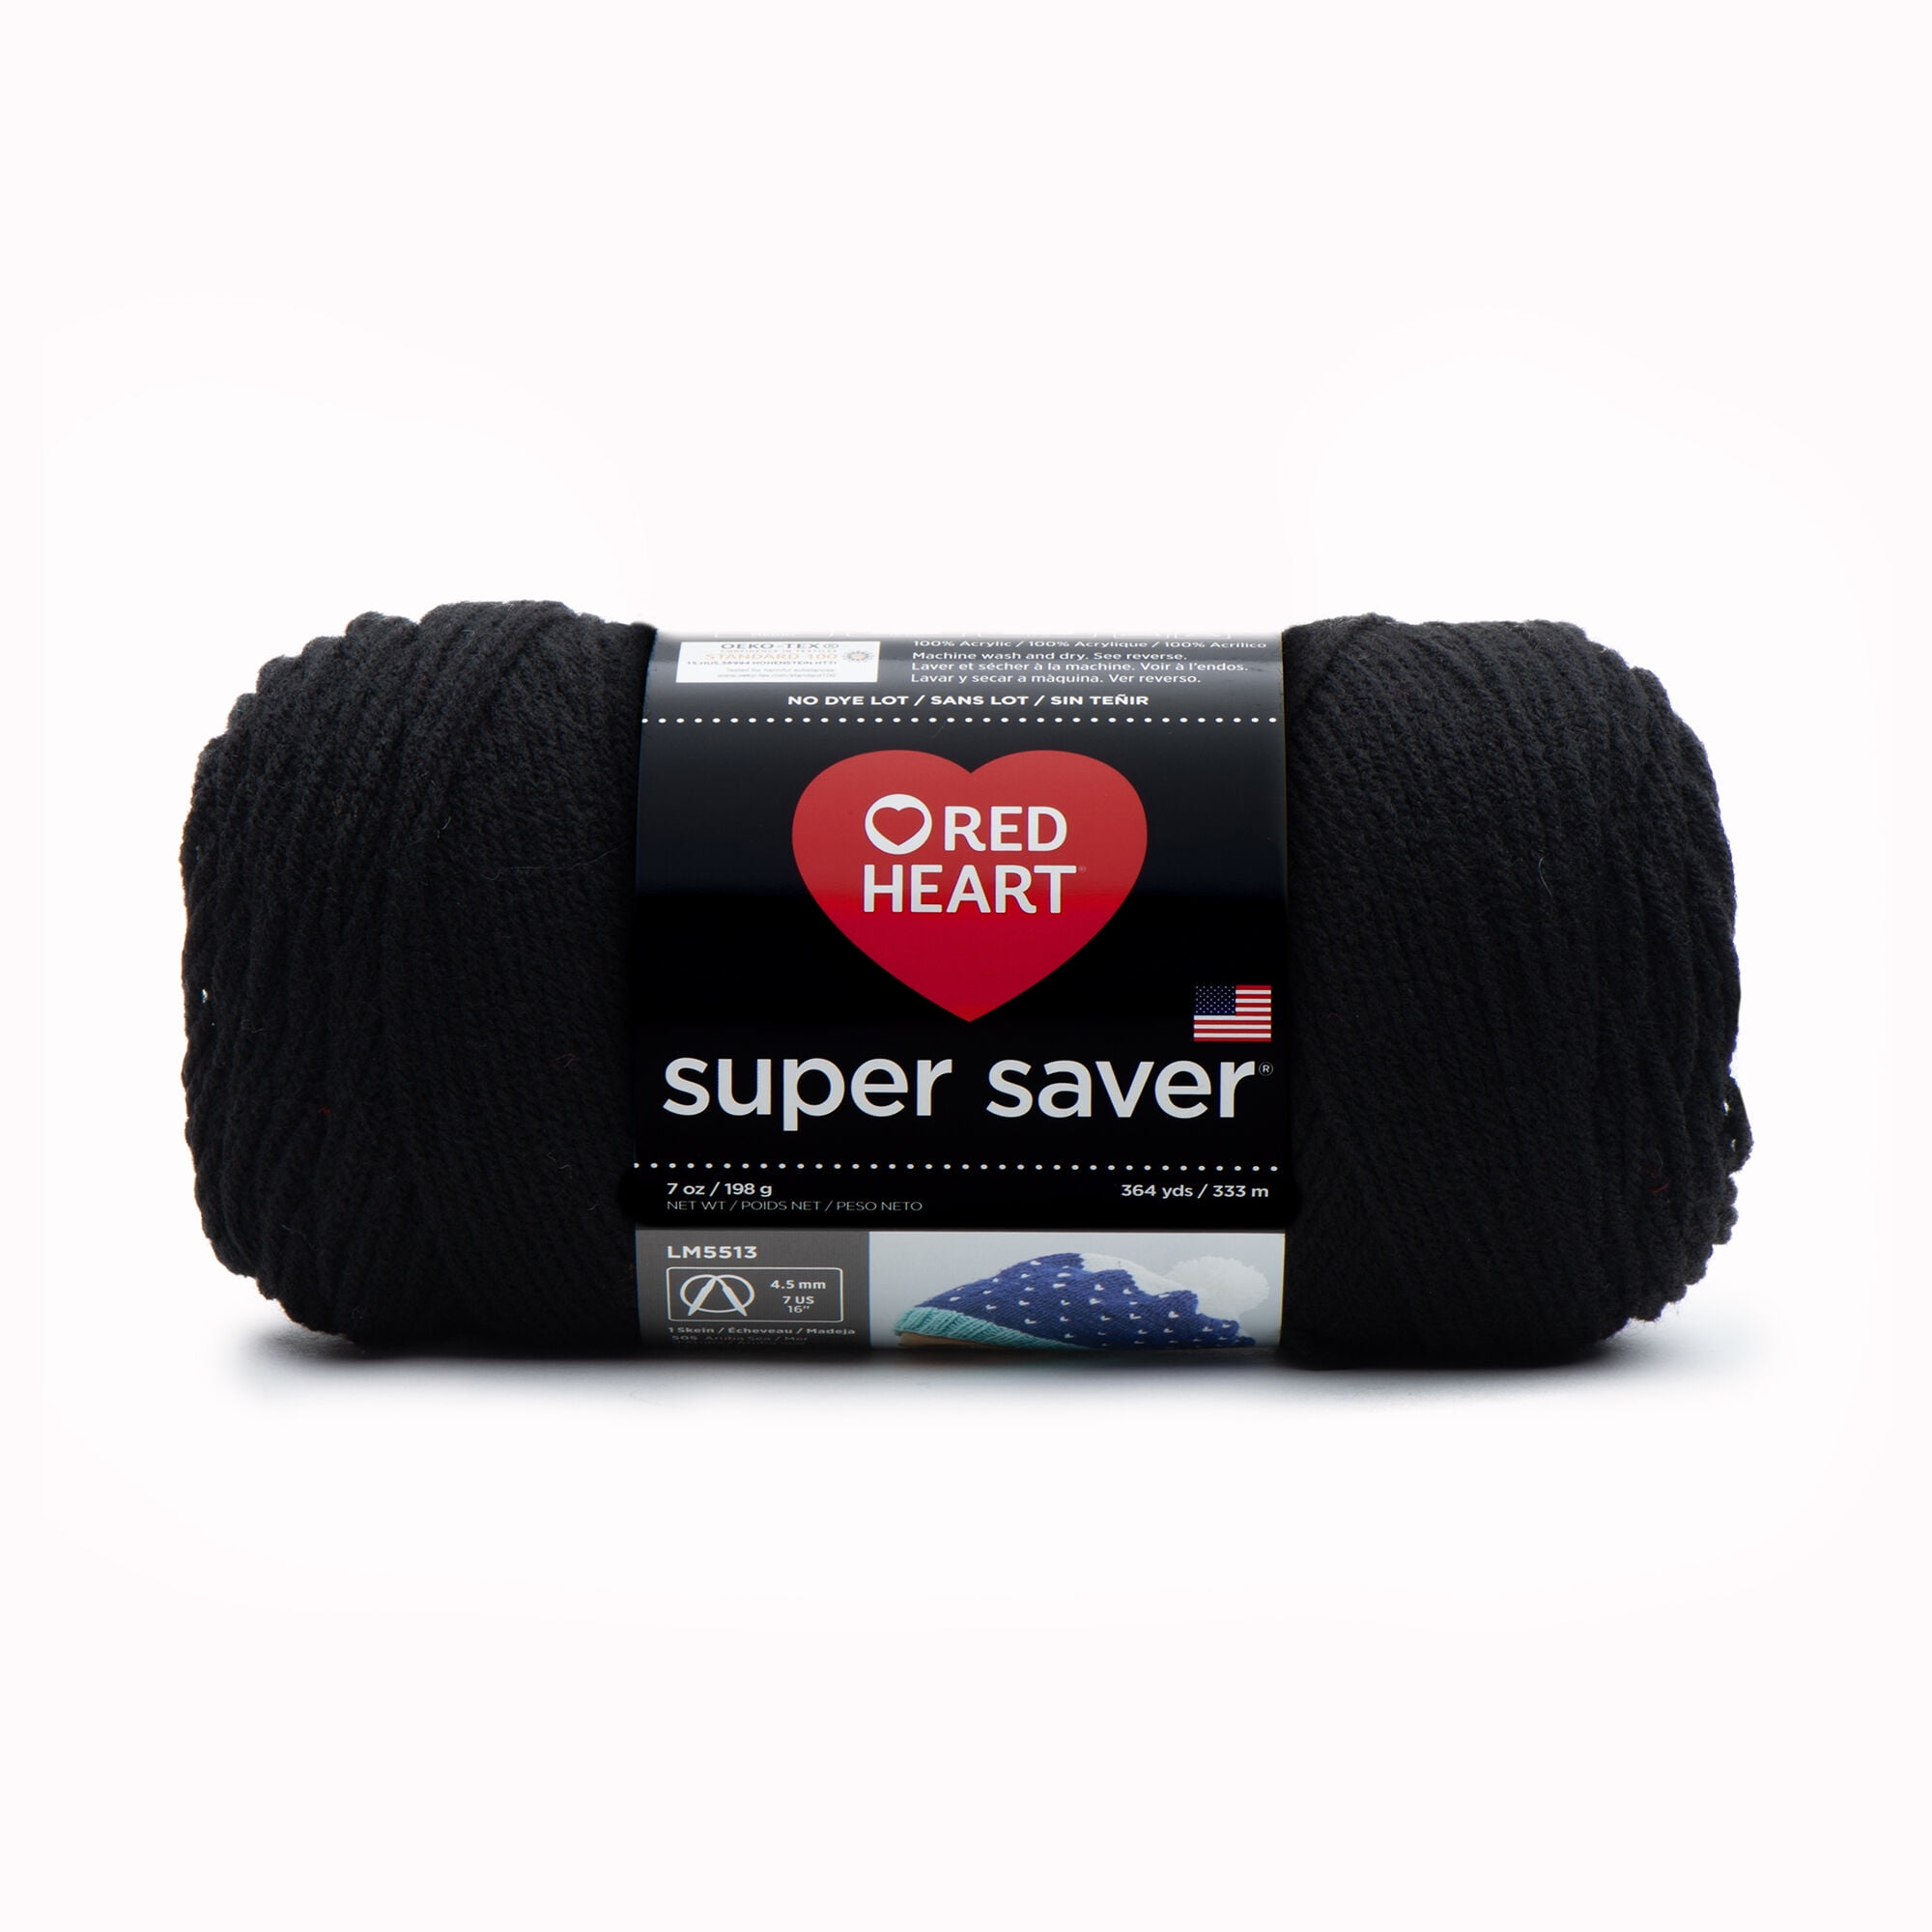 Lot of 2 Skeins RED HEART Super Saver BLACK Yarn Med 4 Worsted Acrylic 7 oz  each